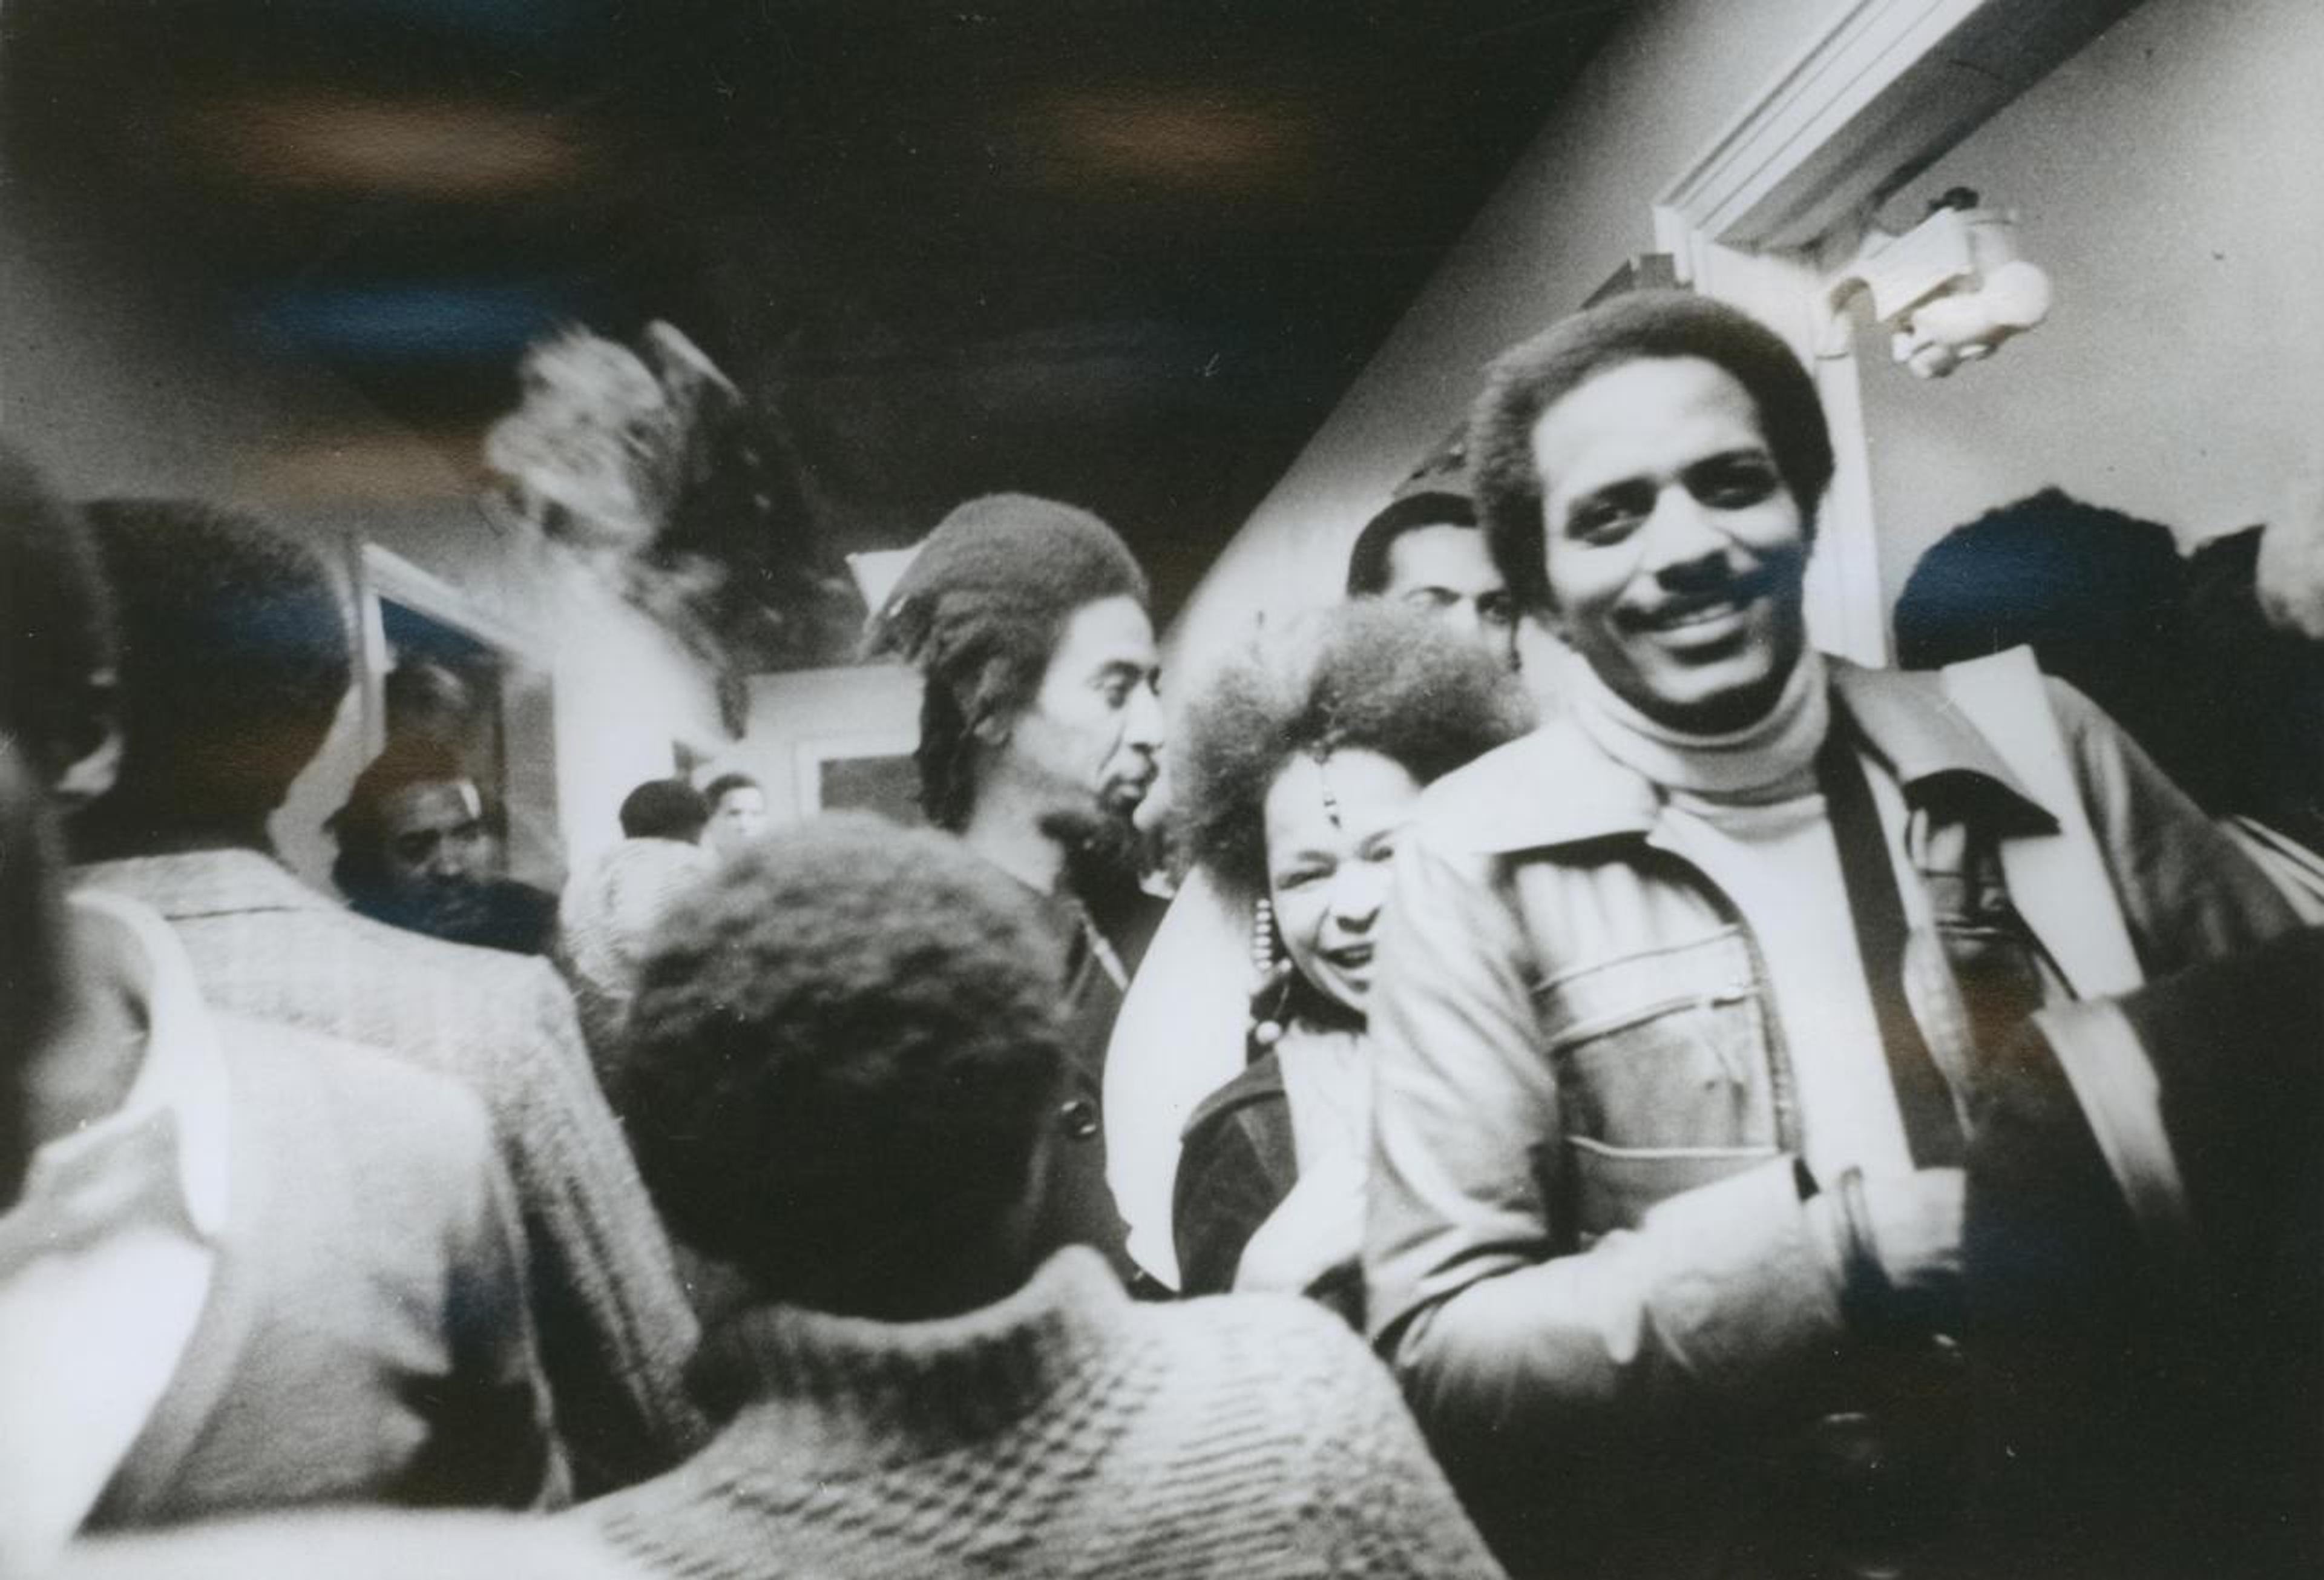 Barbara Mitchell and Tyrone Mitchell at the opening of “Synthesis” at Just Above Midtown, Fifty-Seventh Street, 1974